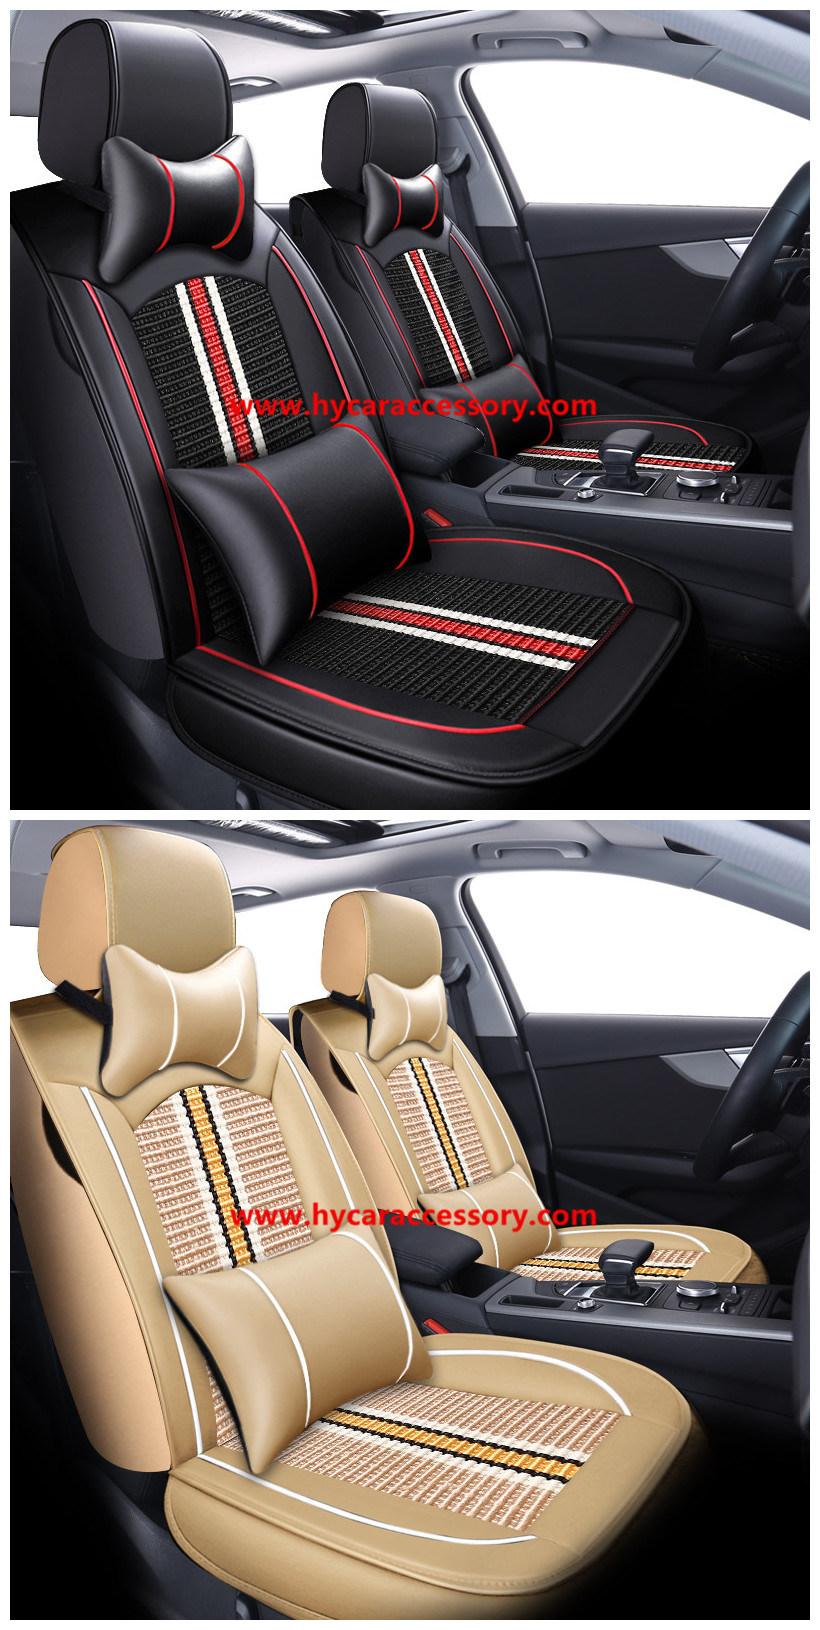 Car Accessories Car Decoration 360 Full Covered Car Seat Cover Universal Luxury Coffee Color Ice Silk PU Leather Auto Car Seat Cushion